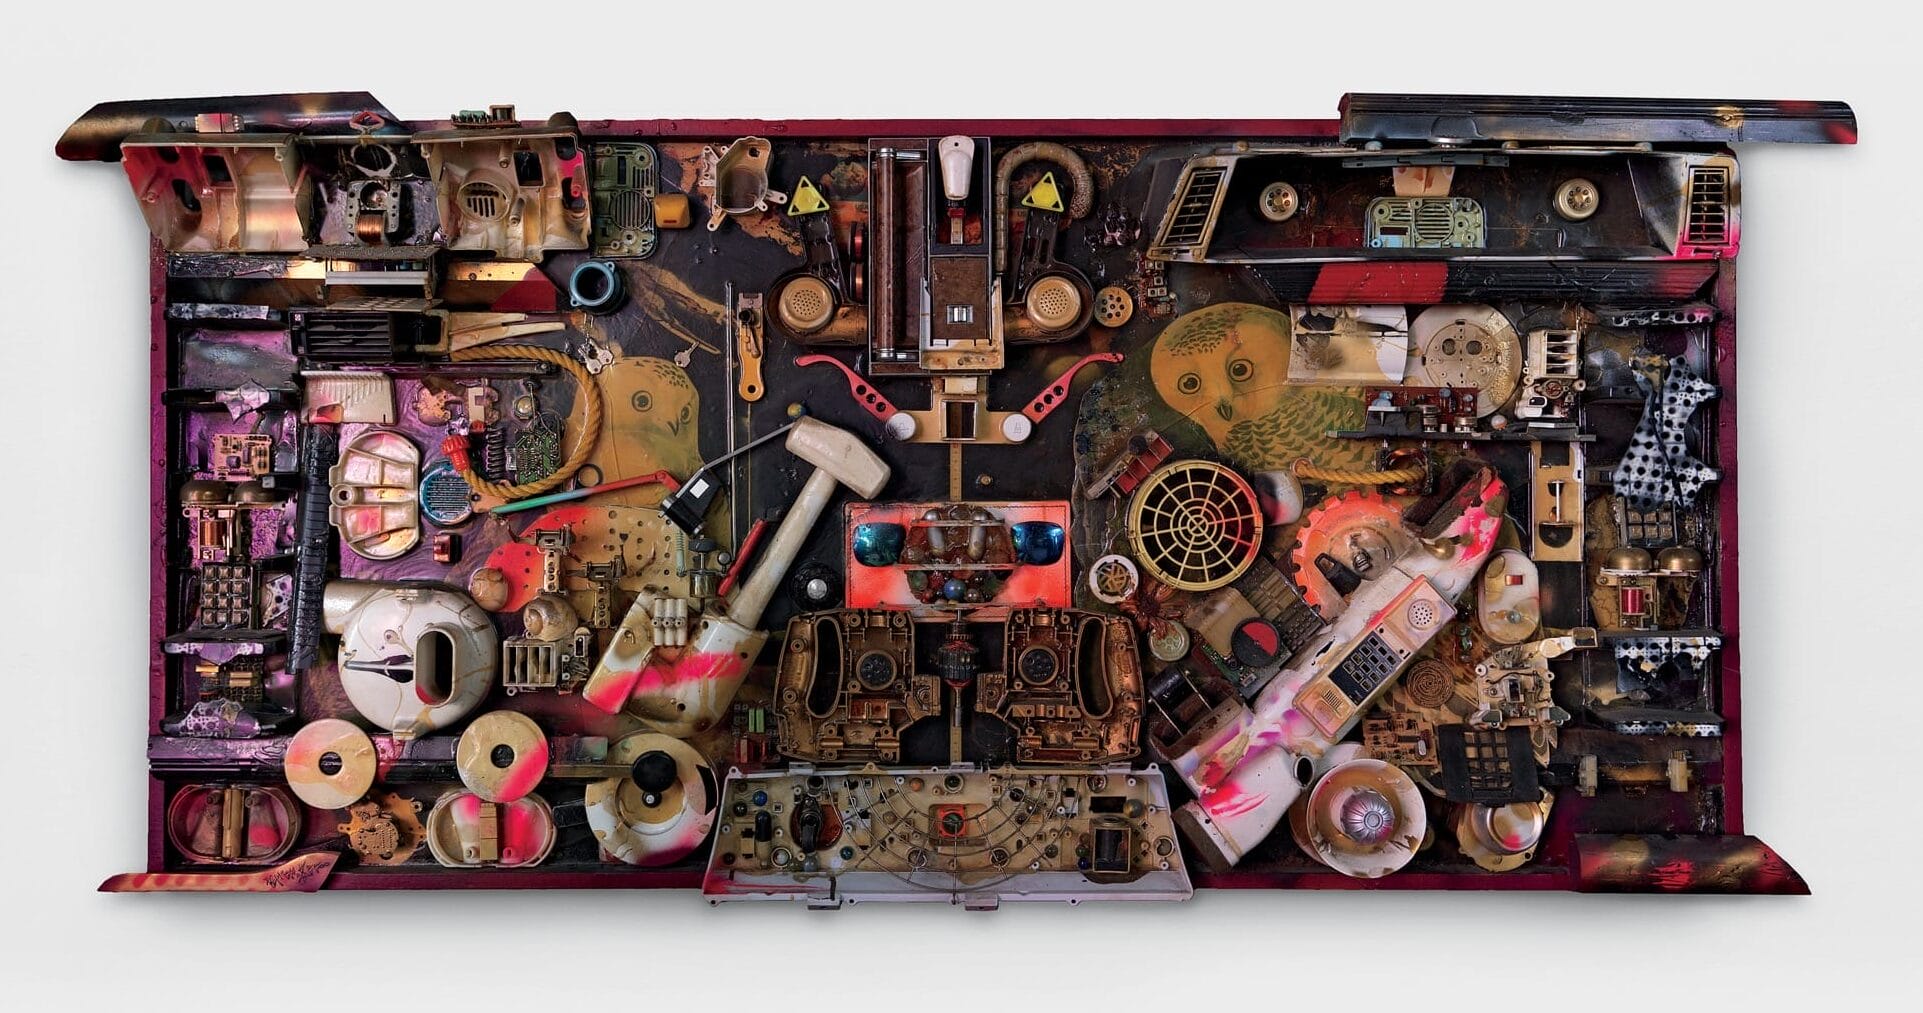 a horizontal assemblage artwork made from found materials like sunglasses, spools, and other found parts